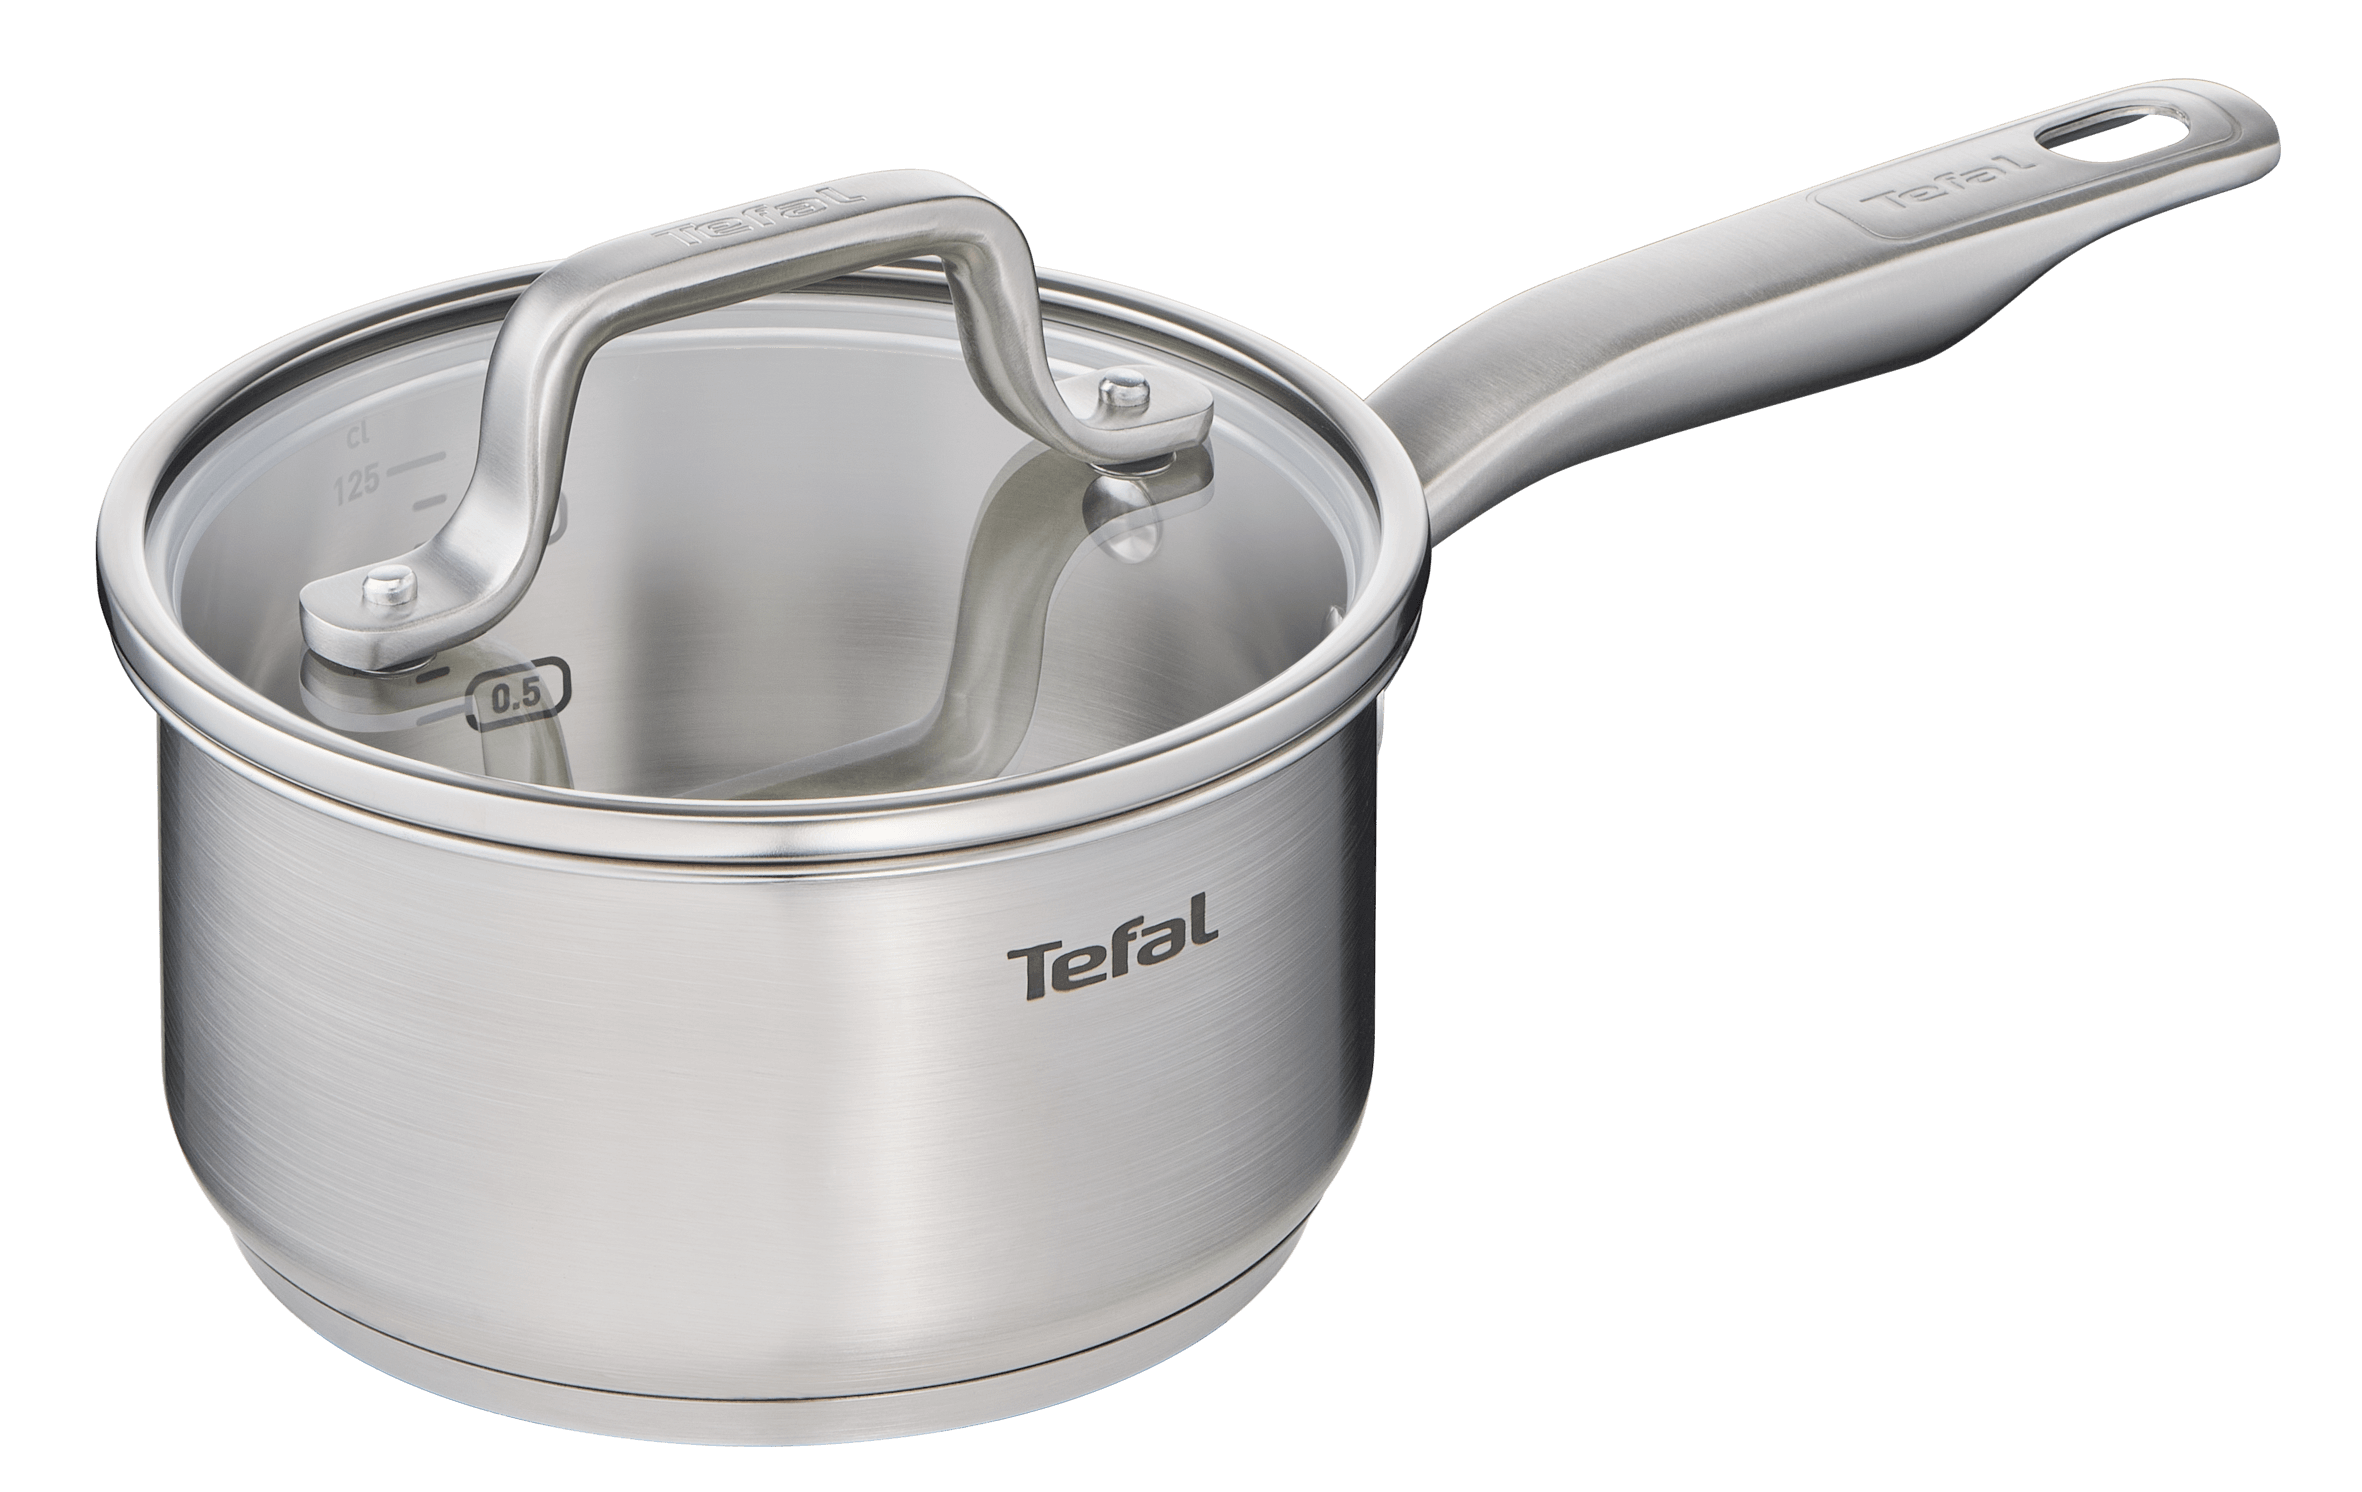 Tefal Virtuoso Induction Stainless Steel 3pc Pot Set